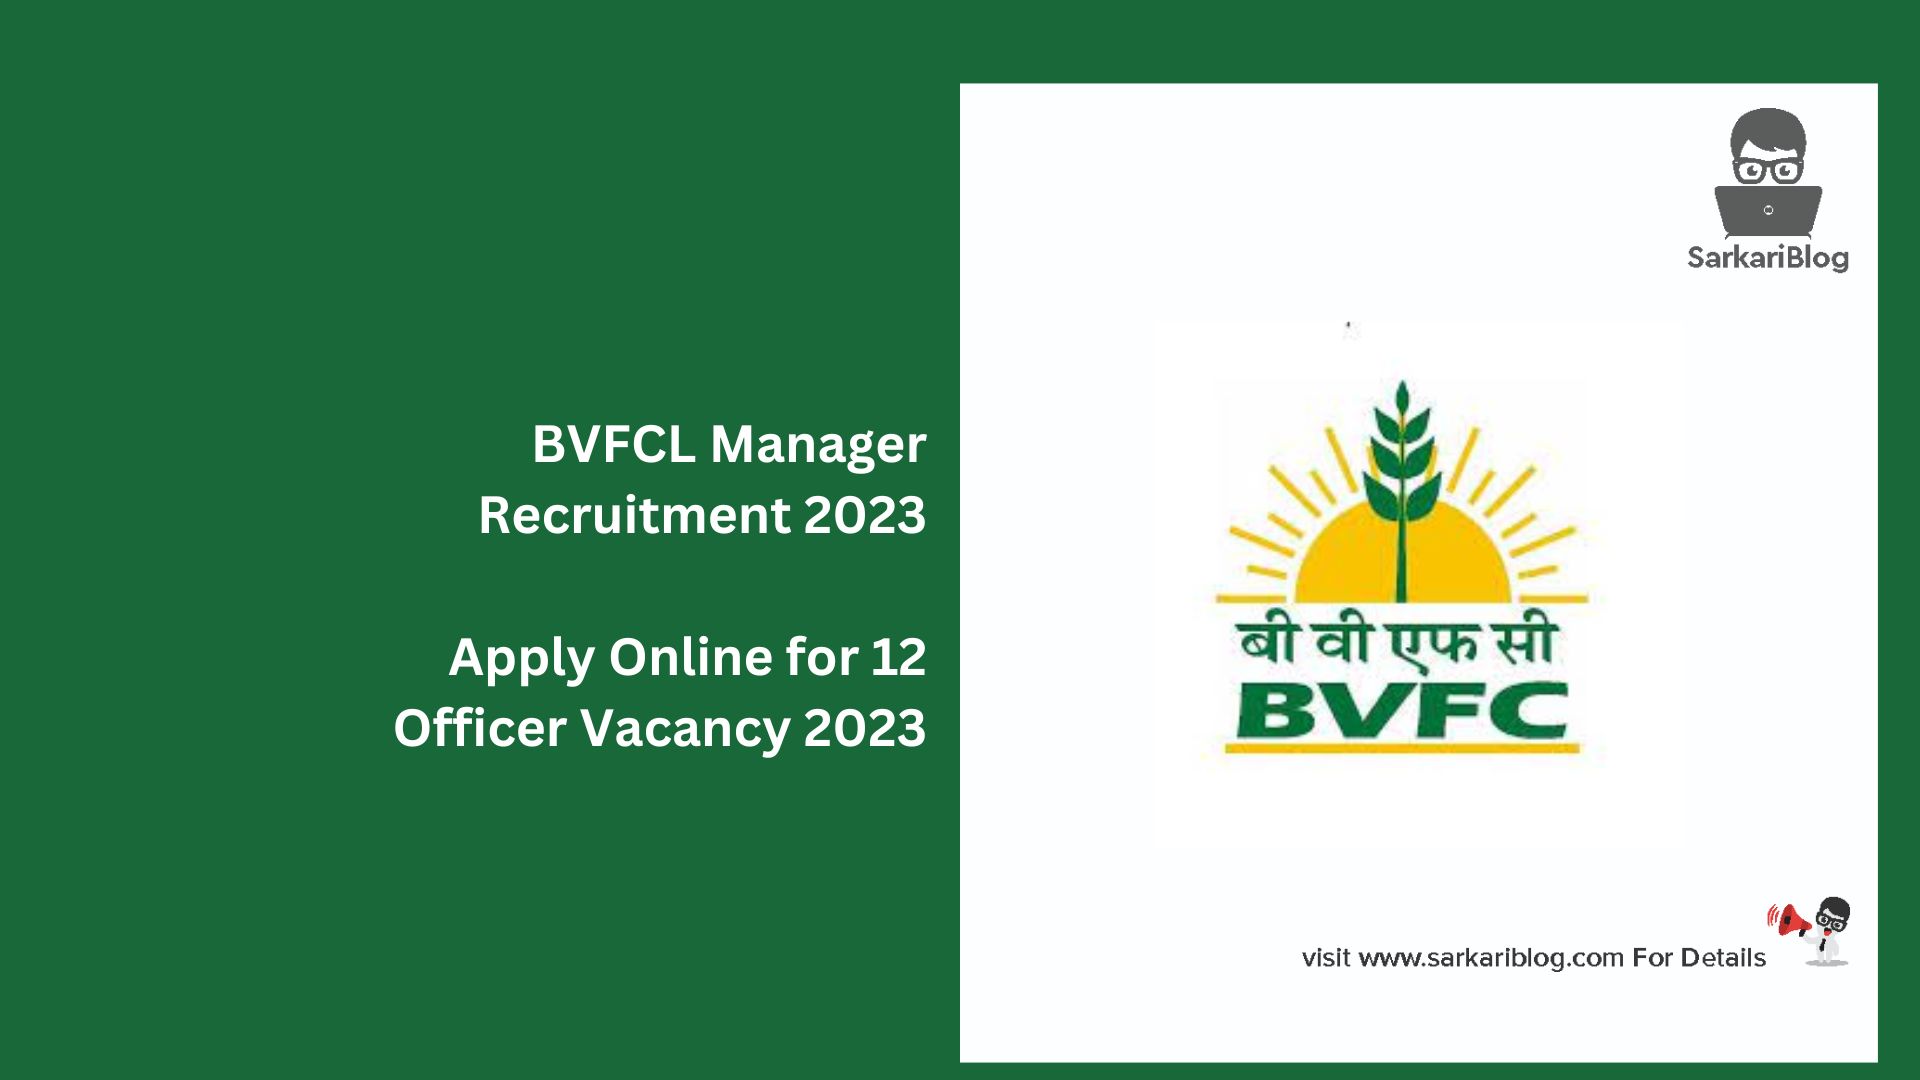 BVFCL Manager Recruitment 2023